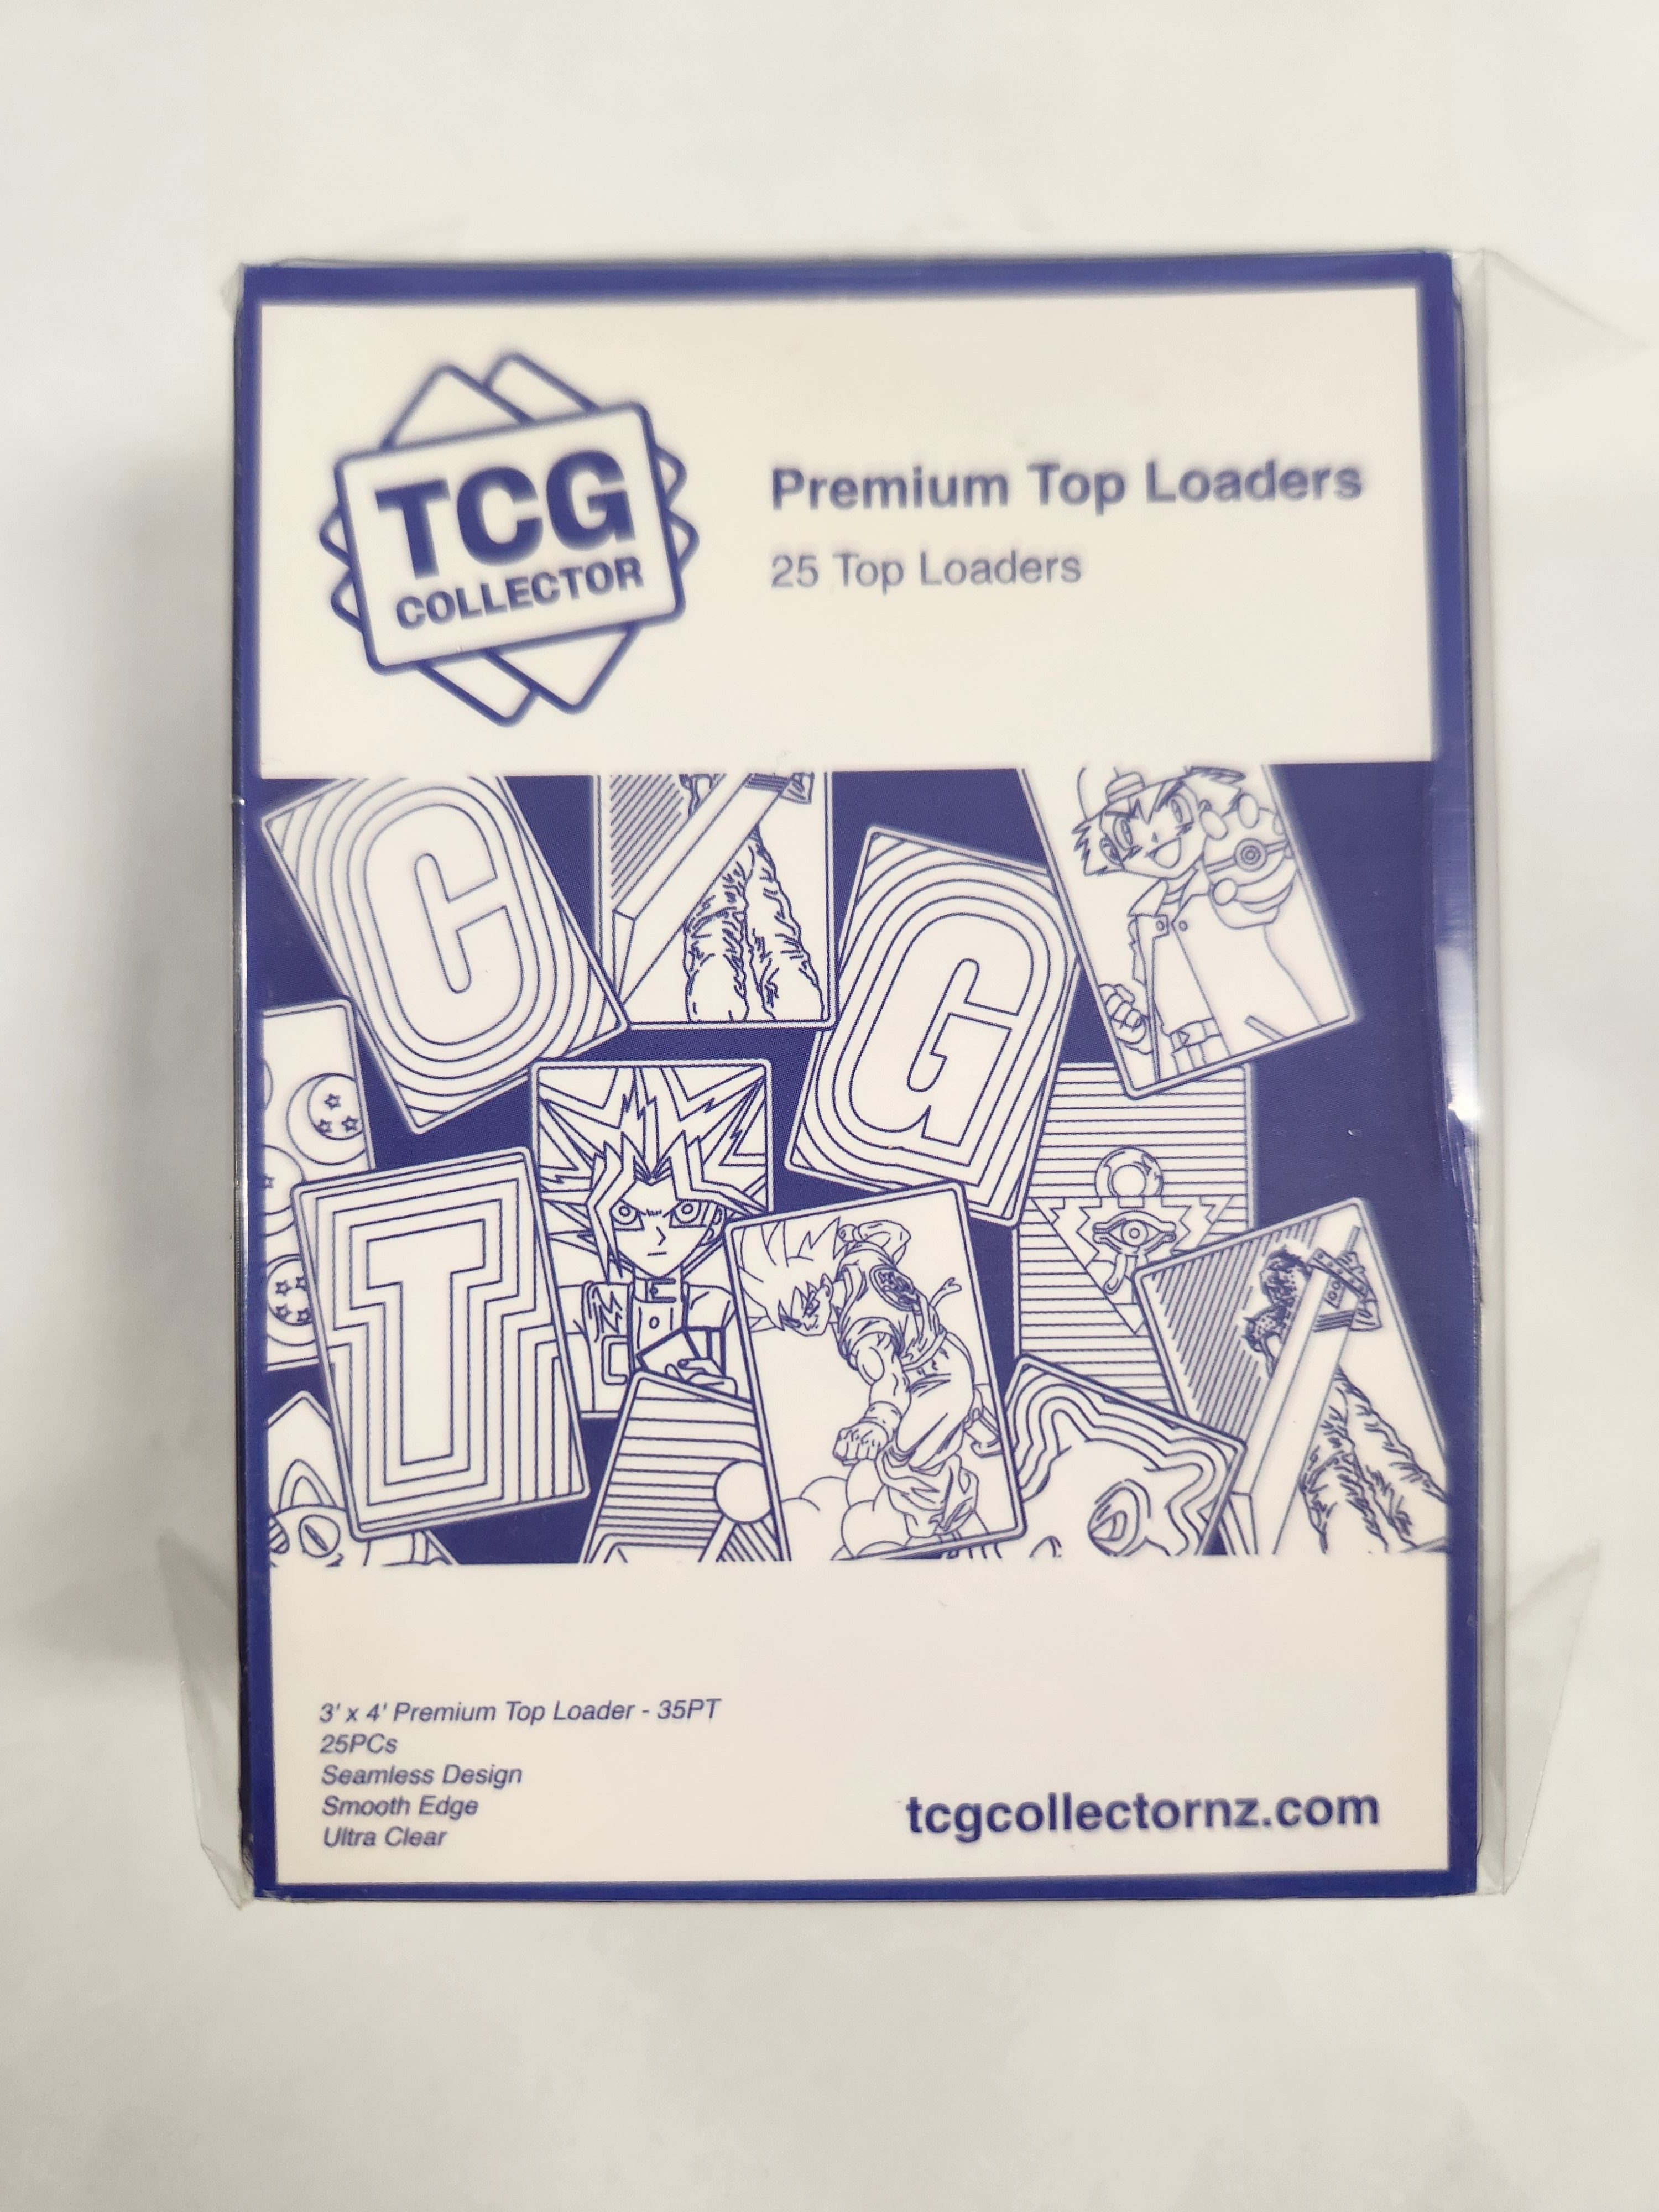 TCG Collector NZ - Premium Top Loaders 35PT - Pack of 25